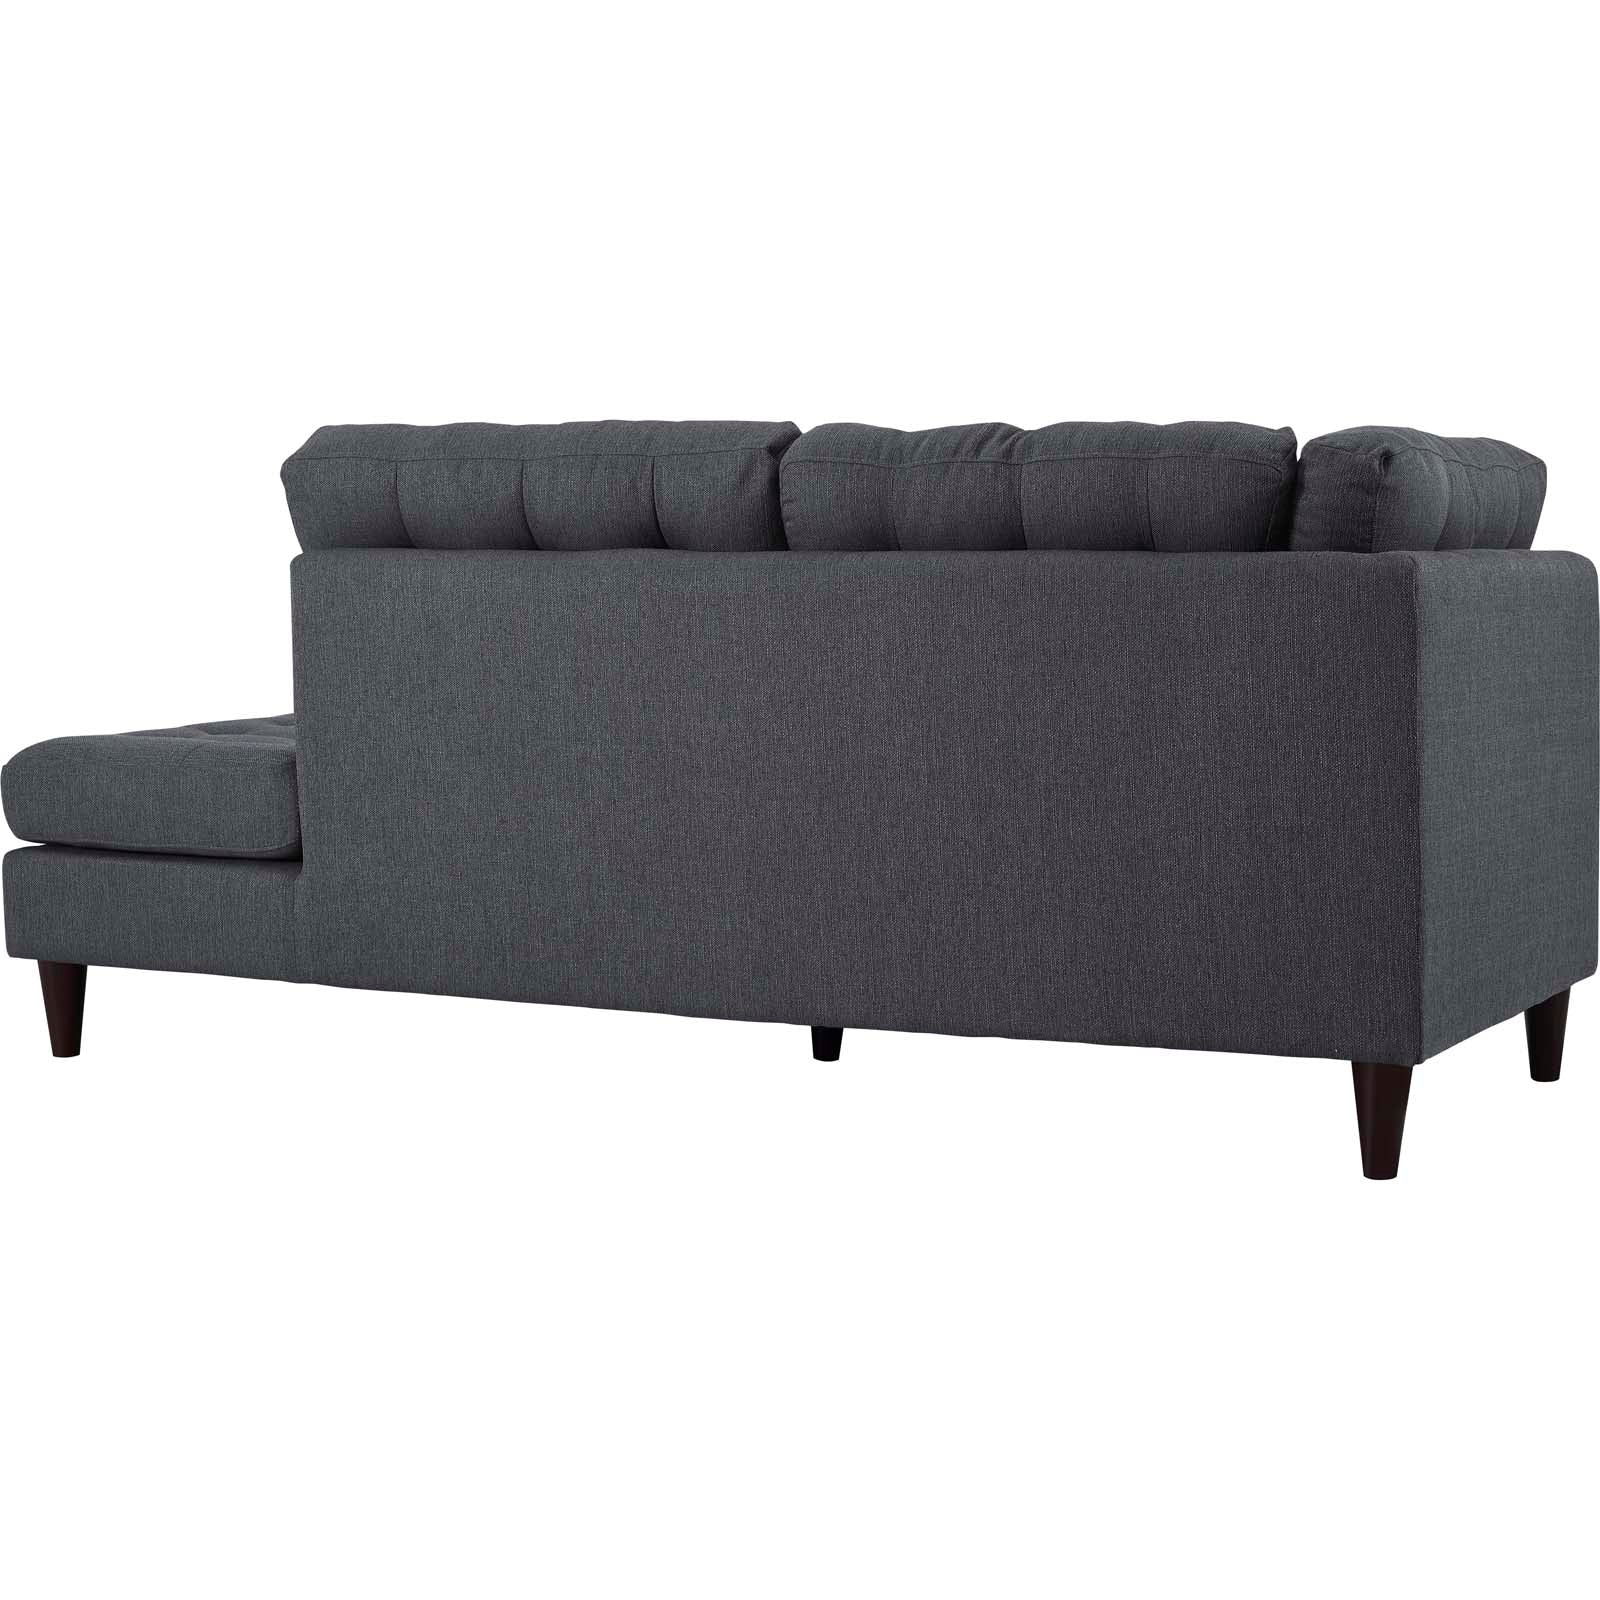 Modway Sleepers & Futons - Empress Upholstered Fabric Right Facing Bumper Gray